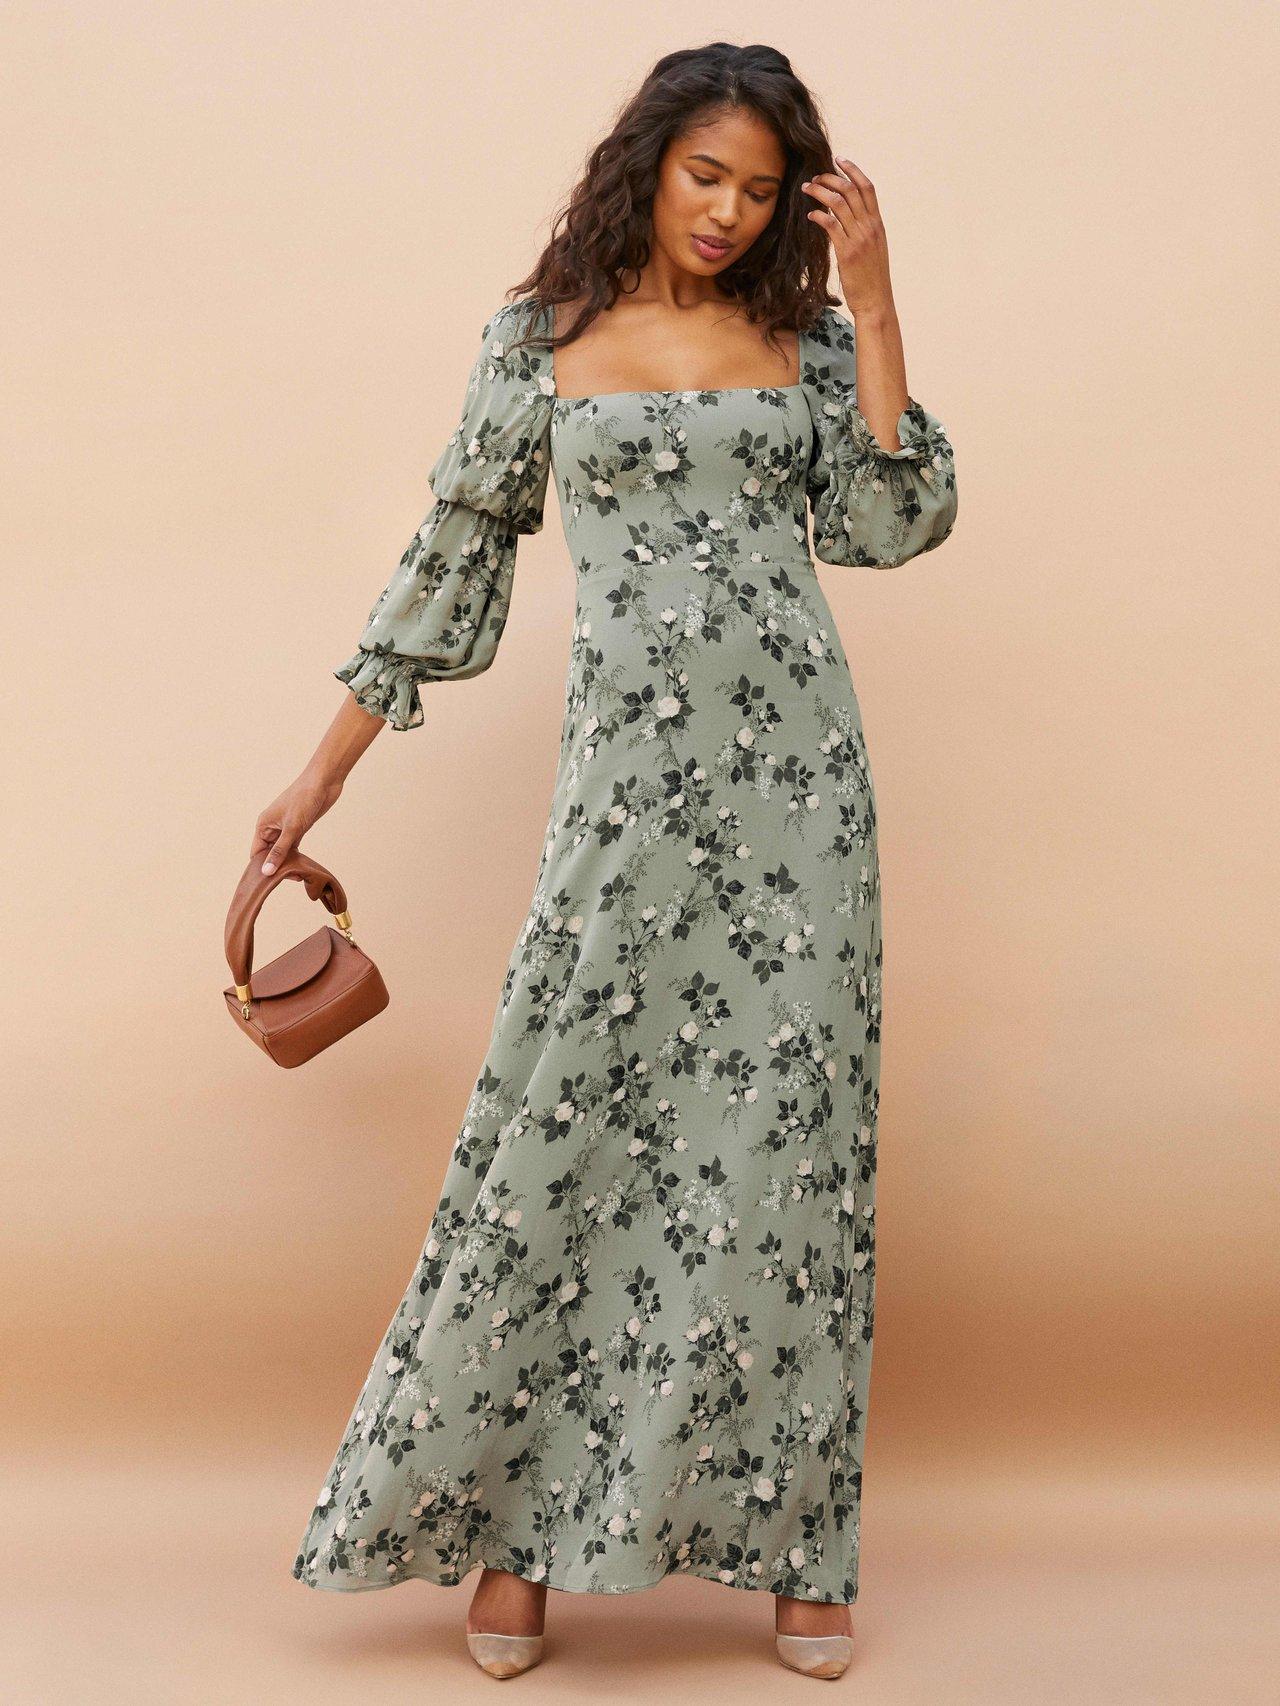 Floral bridesmaid dresses with sleeves